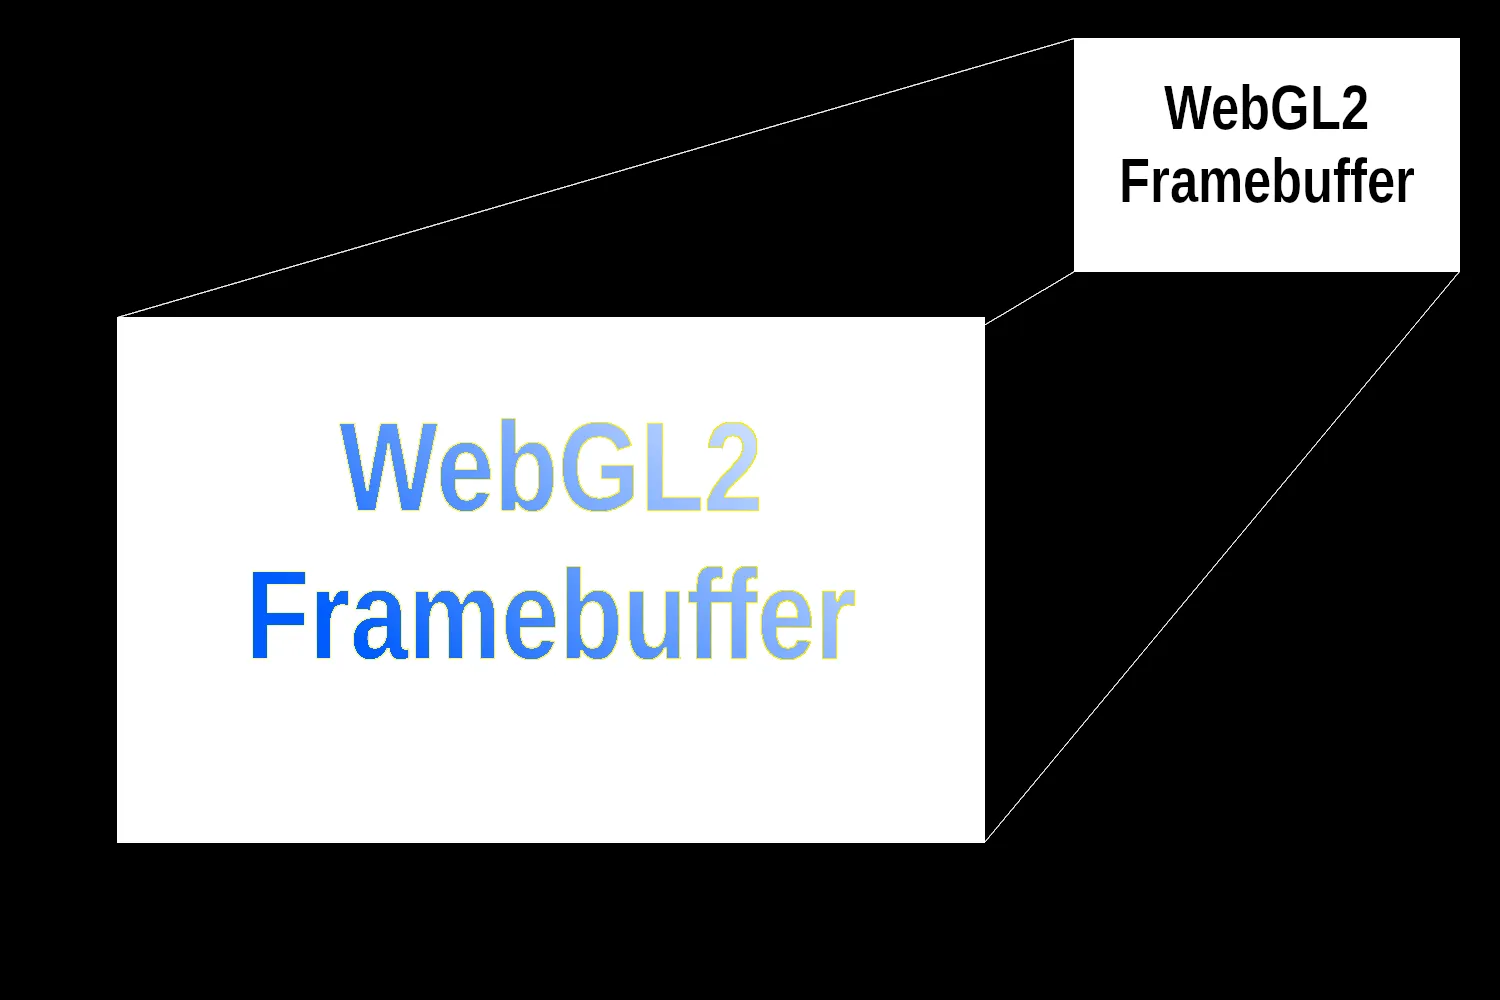 A framebuffer with "WebGL2 Framebuffer" in regular text being rendered onto the display where its enhanced with a blue gradient fill and yellow gradient outline